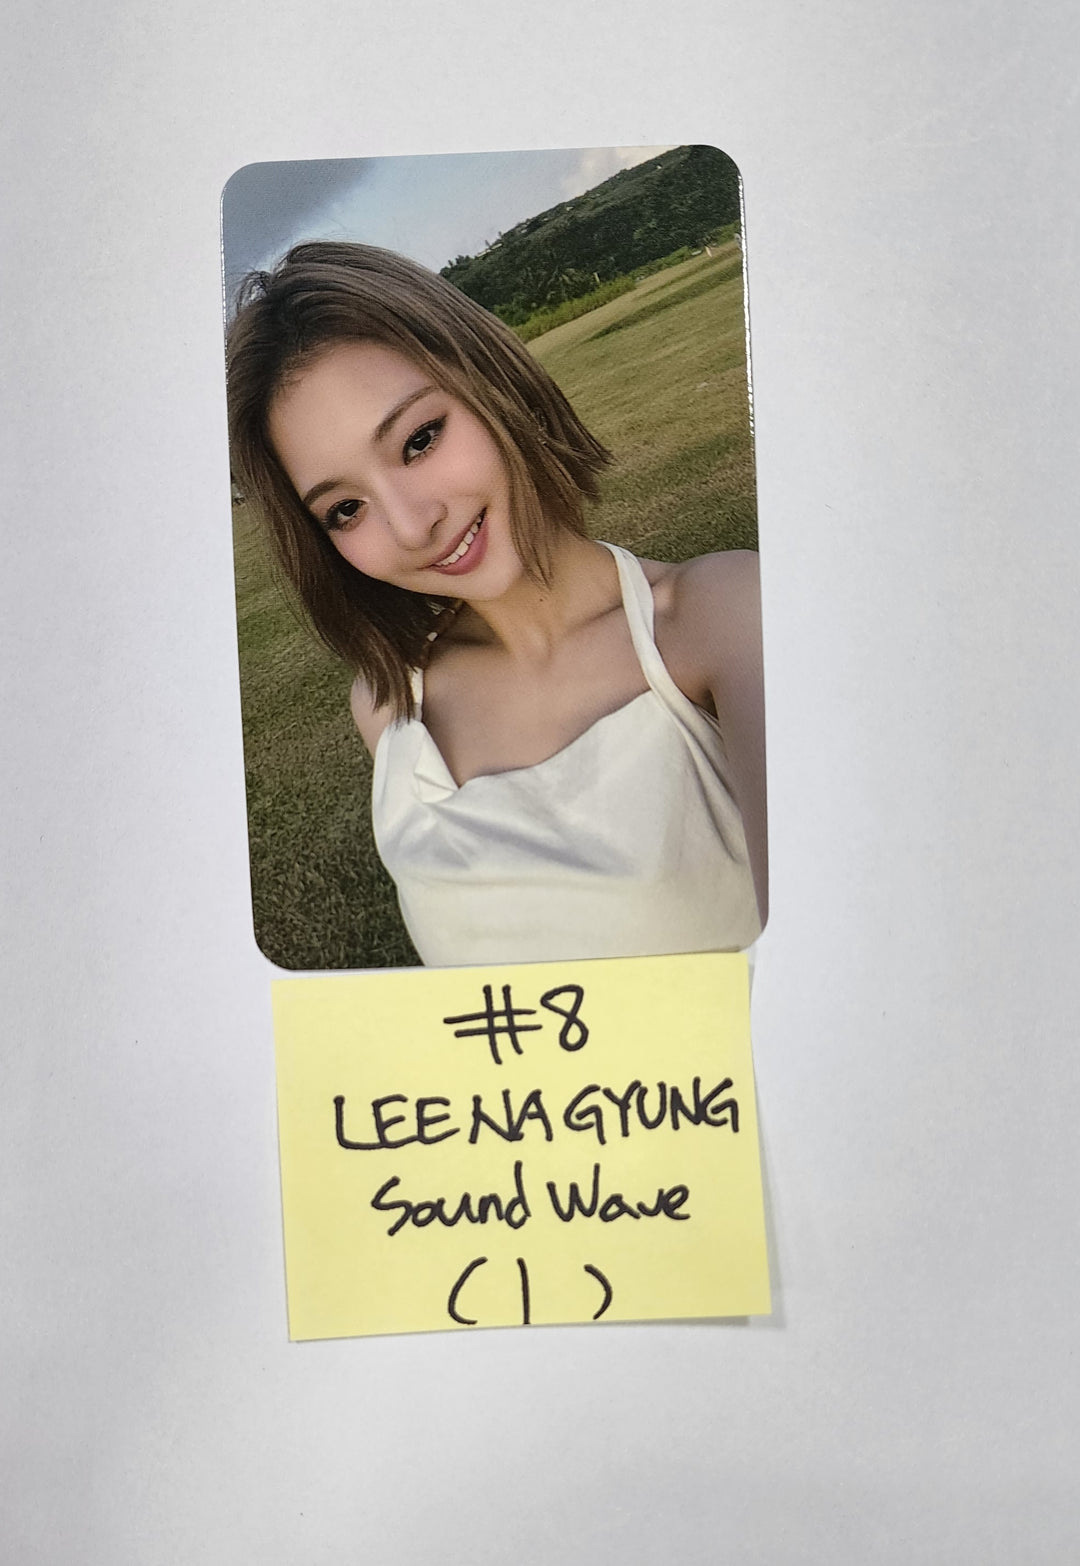 Fromis_9 "from our Memento Box" - Soundwave Fansign Event Photocard